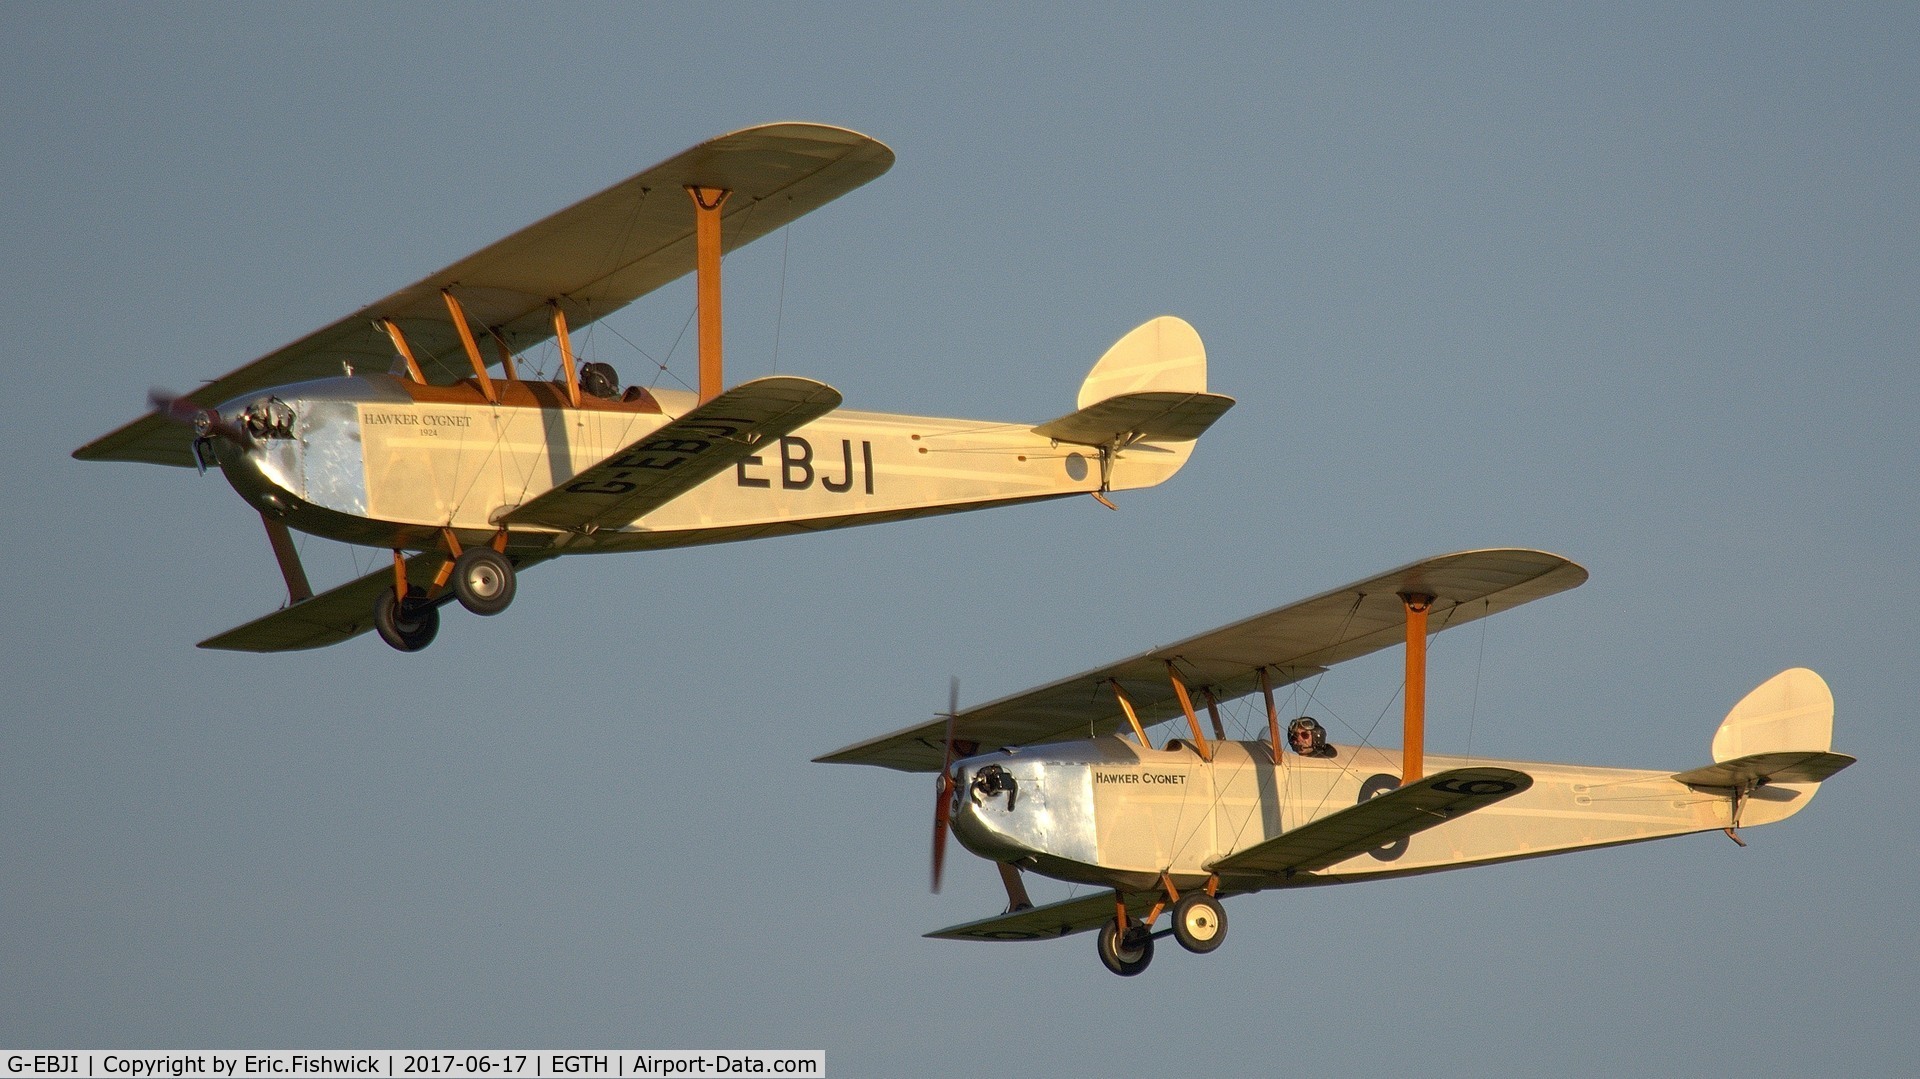 G-EBJI, 1977 Hawker Cygnet Replica C/N PFA 077-10240, el. A pair of Hawker Cygnets in formation display mode at the epic Evening Airshow, The Shuttleworth Collection, June, 2017